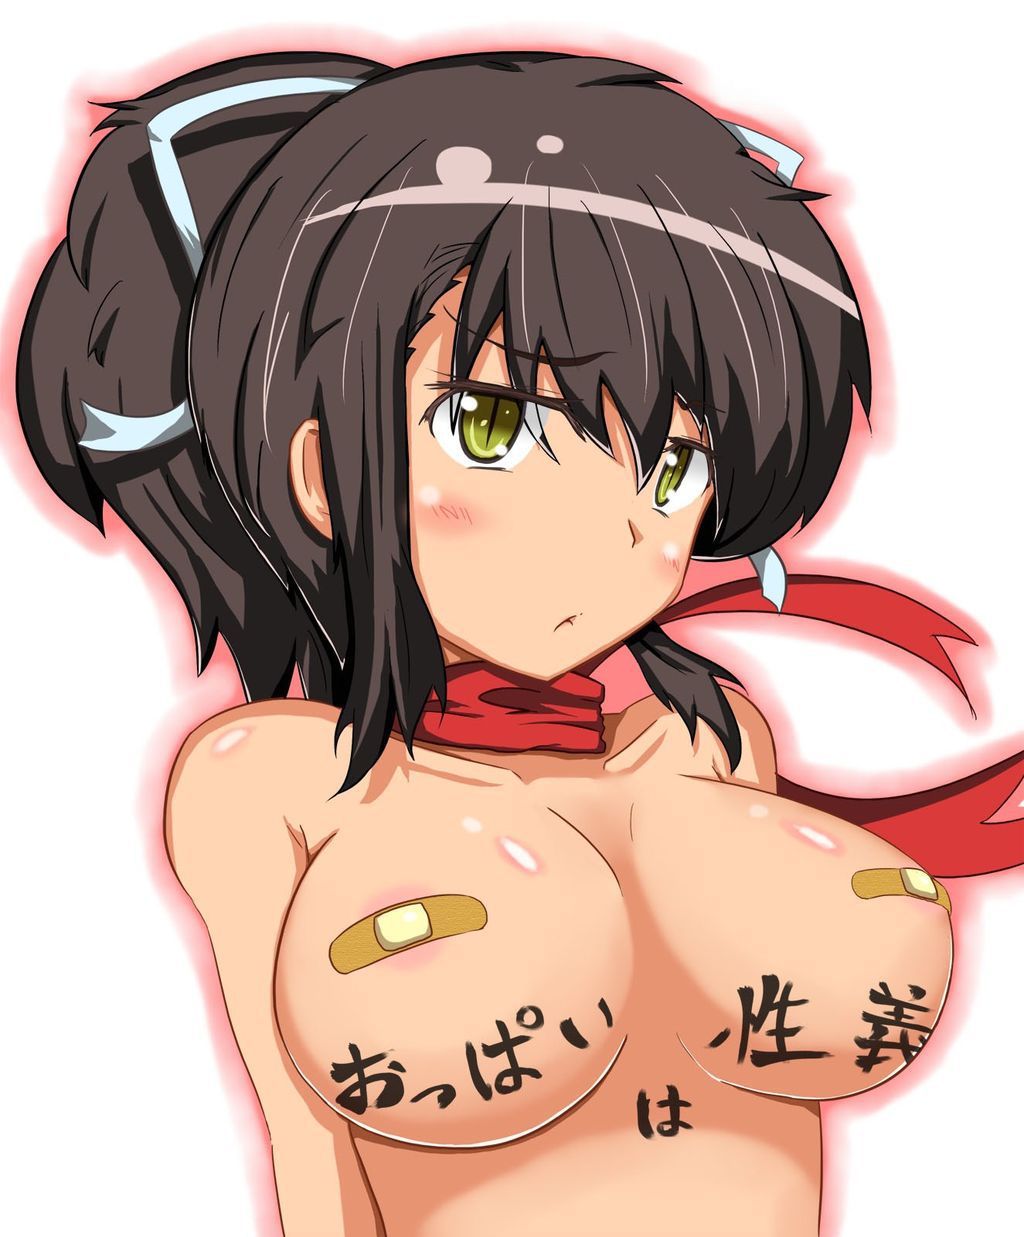 I tried to collect erotic images of Senran Kagra 10